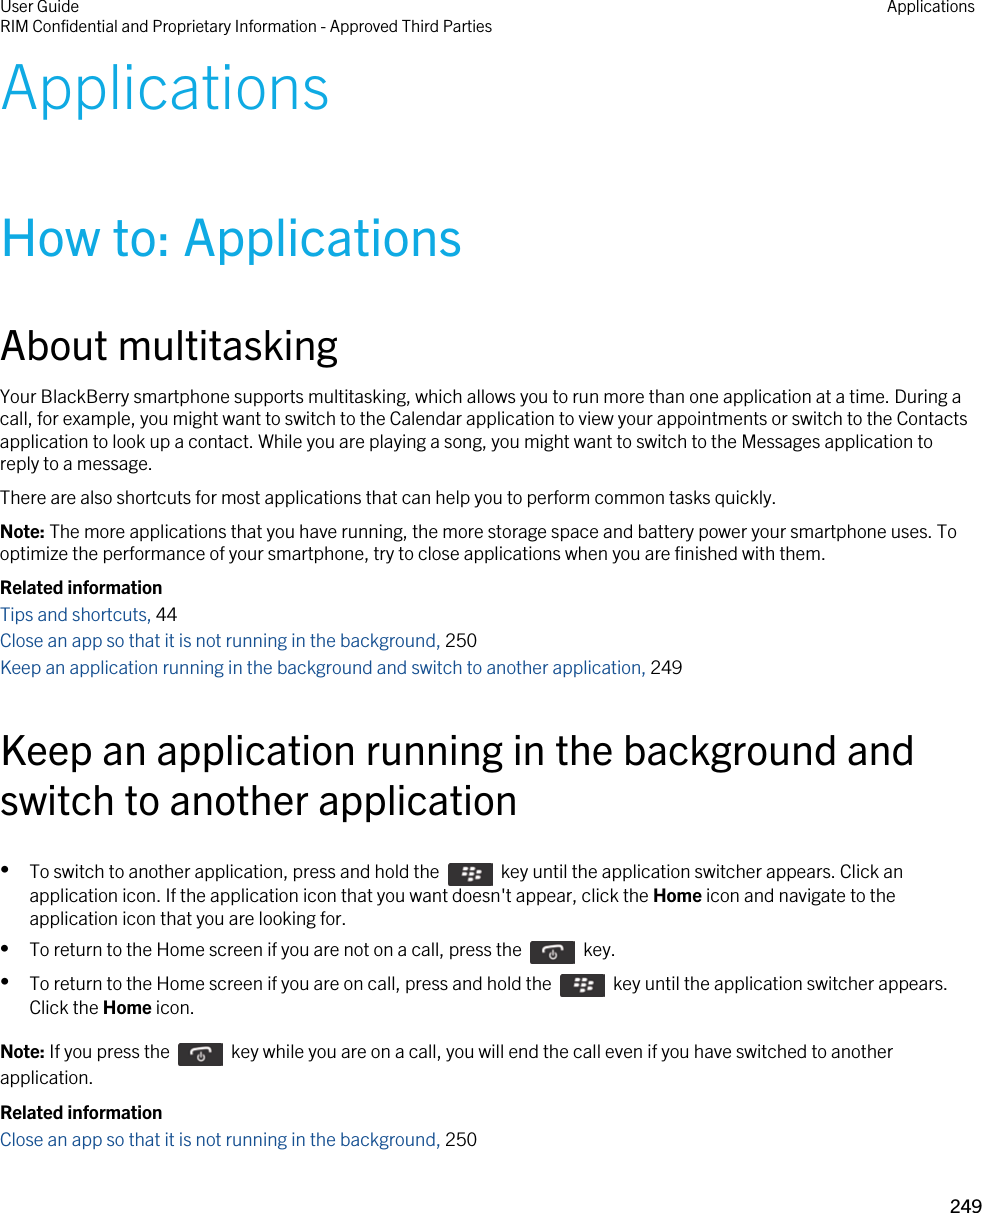 ApplicationsHow to: ApplicationsAbout multitaskingYour BlackBerry smartphone supports multitasking, which allows you to run more than one application at a time. During a call, for example, you might want to switch to the Calendar application to view your appointments or switch to the Contacts application to look up a contact. While you are playing a song, you might want to switch to the Messages application to reply to a message.There are also shortcuts for most applications that can help you to perform common tasks quickly.Note: The more applications that you have running, the more storage space and battery power your smartphone uses. To optimize the performance of your smartphone, try to close applications when you are finished with them.Related informationTips and shortcuts, 44 Close an app so that it is not running in the background, 250Keep an application running in the background and switch to another application, 249Keep an application running in the background and switch to another application•To switch to another application, press and hold the    key until the application switcher appears. Click an application icon. If the application icon that you want doesn&apos;t appear, click the Home icon and navigate to the application icon that you are looking for.•To return to the Home screen if you are not on a call, press the    key. •To return to the Home screen if you are on call, press and hold the    key until the application switcher appears. Click the Home icon.Note: If you press the    key while you are on a call, you will end the call even if you have switched to another application.Related informationClose an app so that it is not running in the background, 250User GuideRIM Confidential and Proprietary Information - Approved Third Parties Applications249 